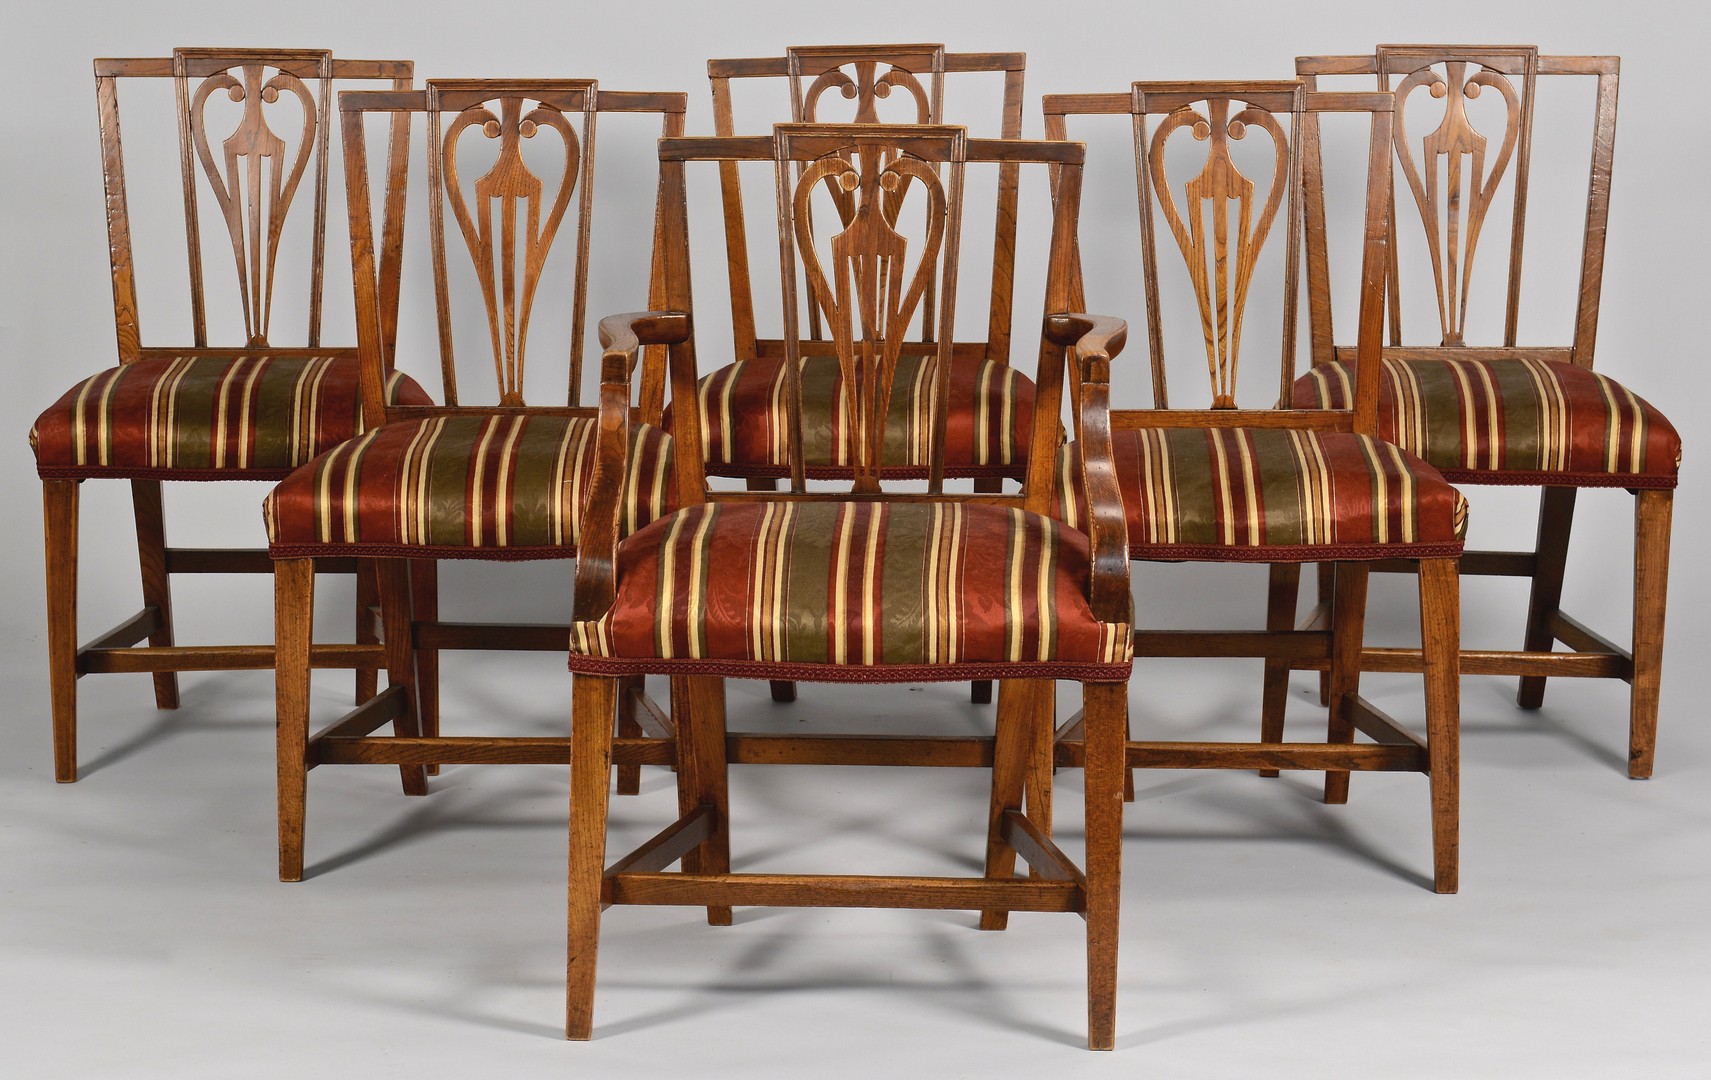 Lot 101: Set of 6 English Dining Chairs c. 1800